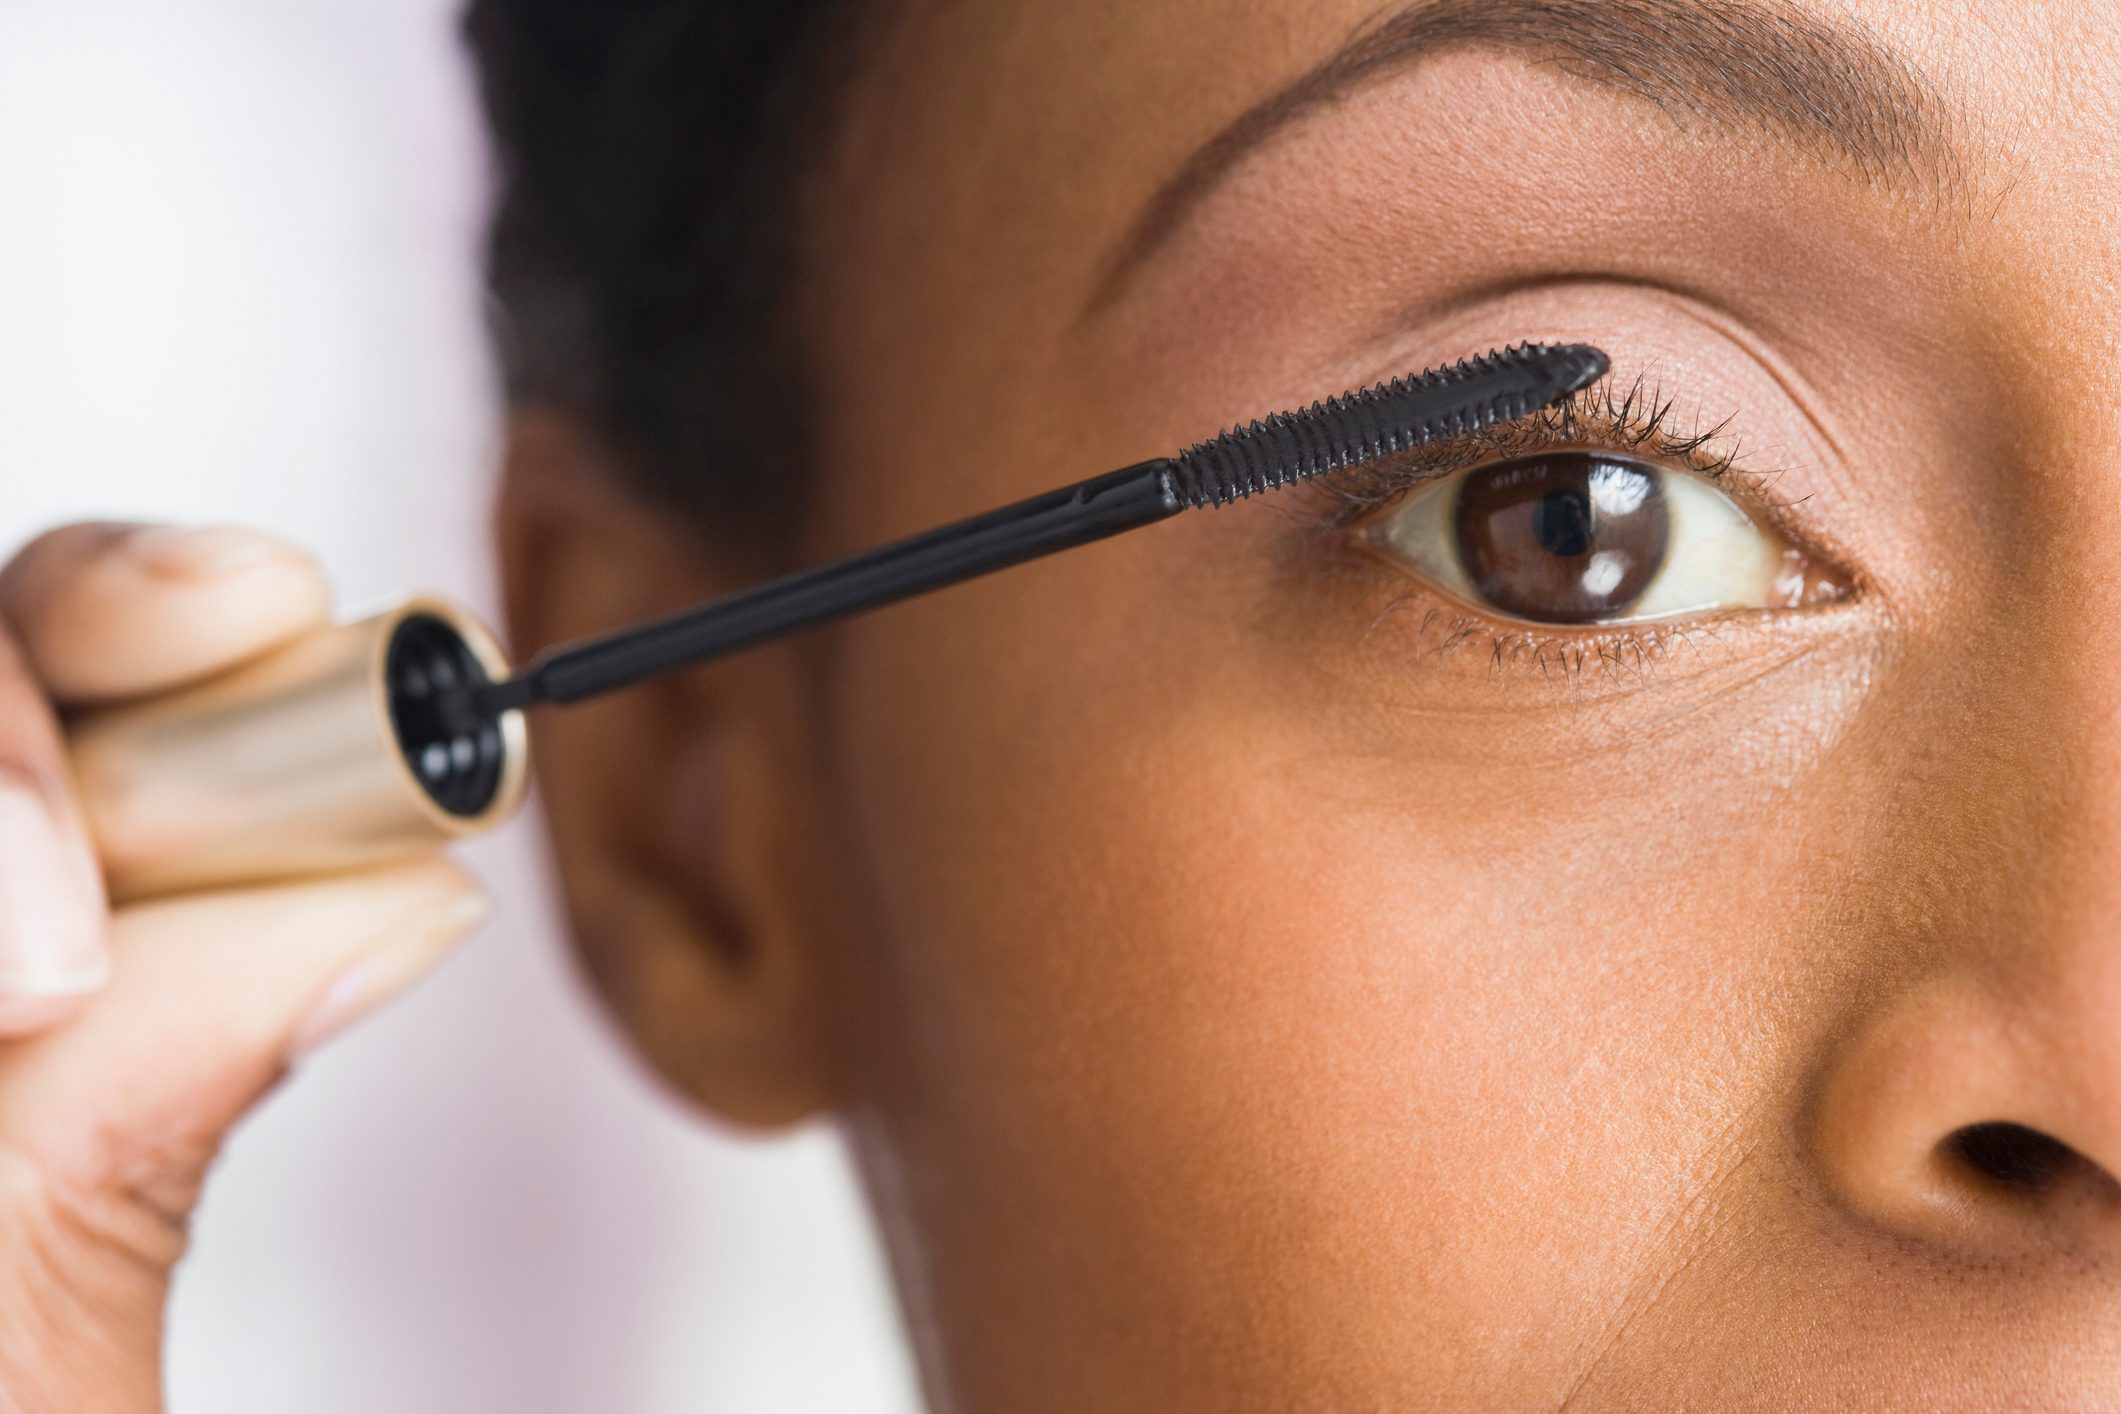 13 Beauty Trends that Are Downright Dangerous